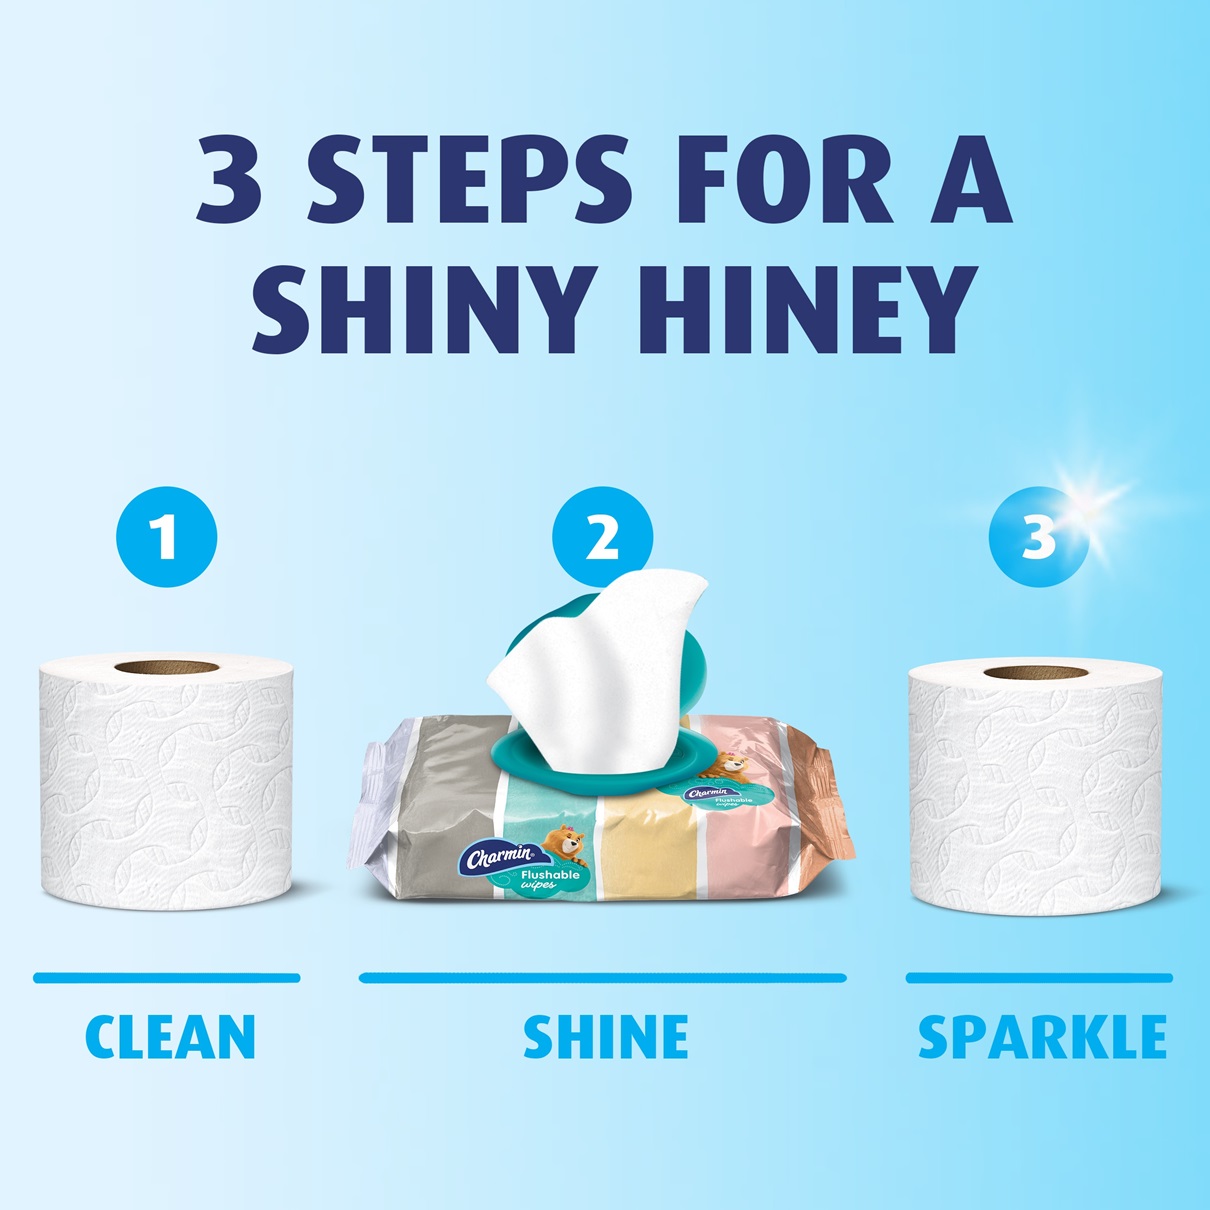 How to use toilet paper with flushable wipes for shiny hiney